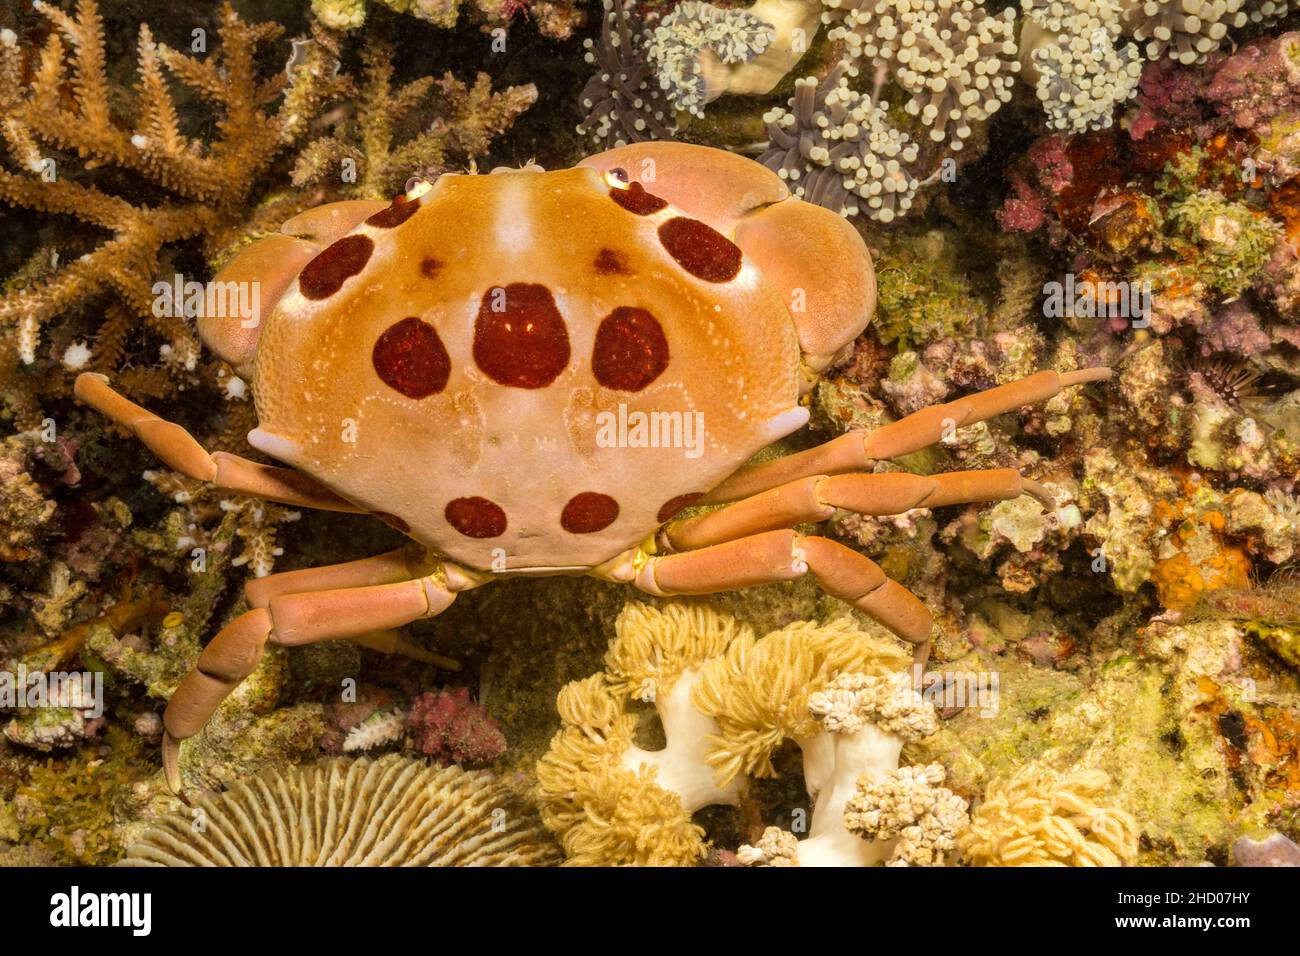 The spotted reef crab, Carpilius maculatus, is also known as a seven-eleven crab or dark finger coral crab,  Philippines. Stock Photo